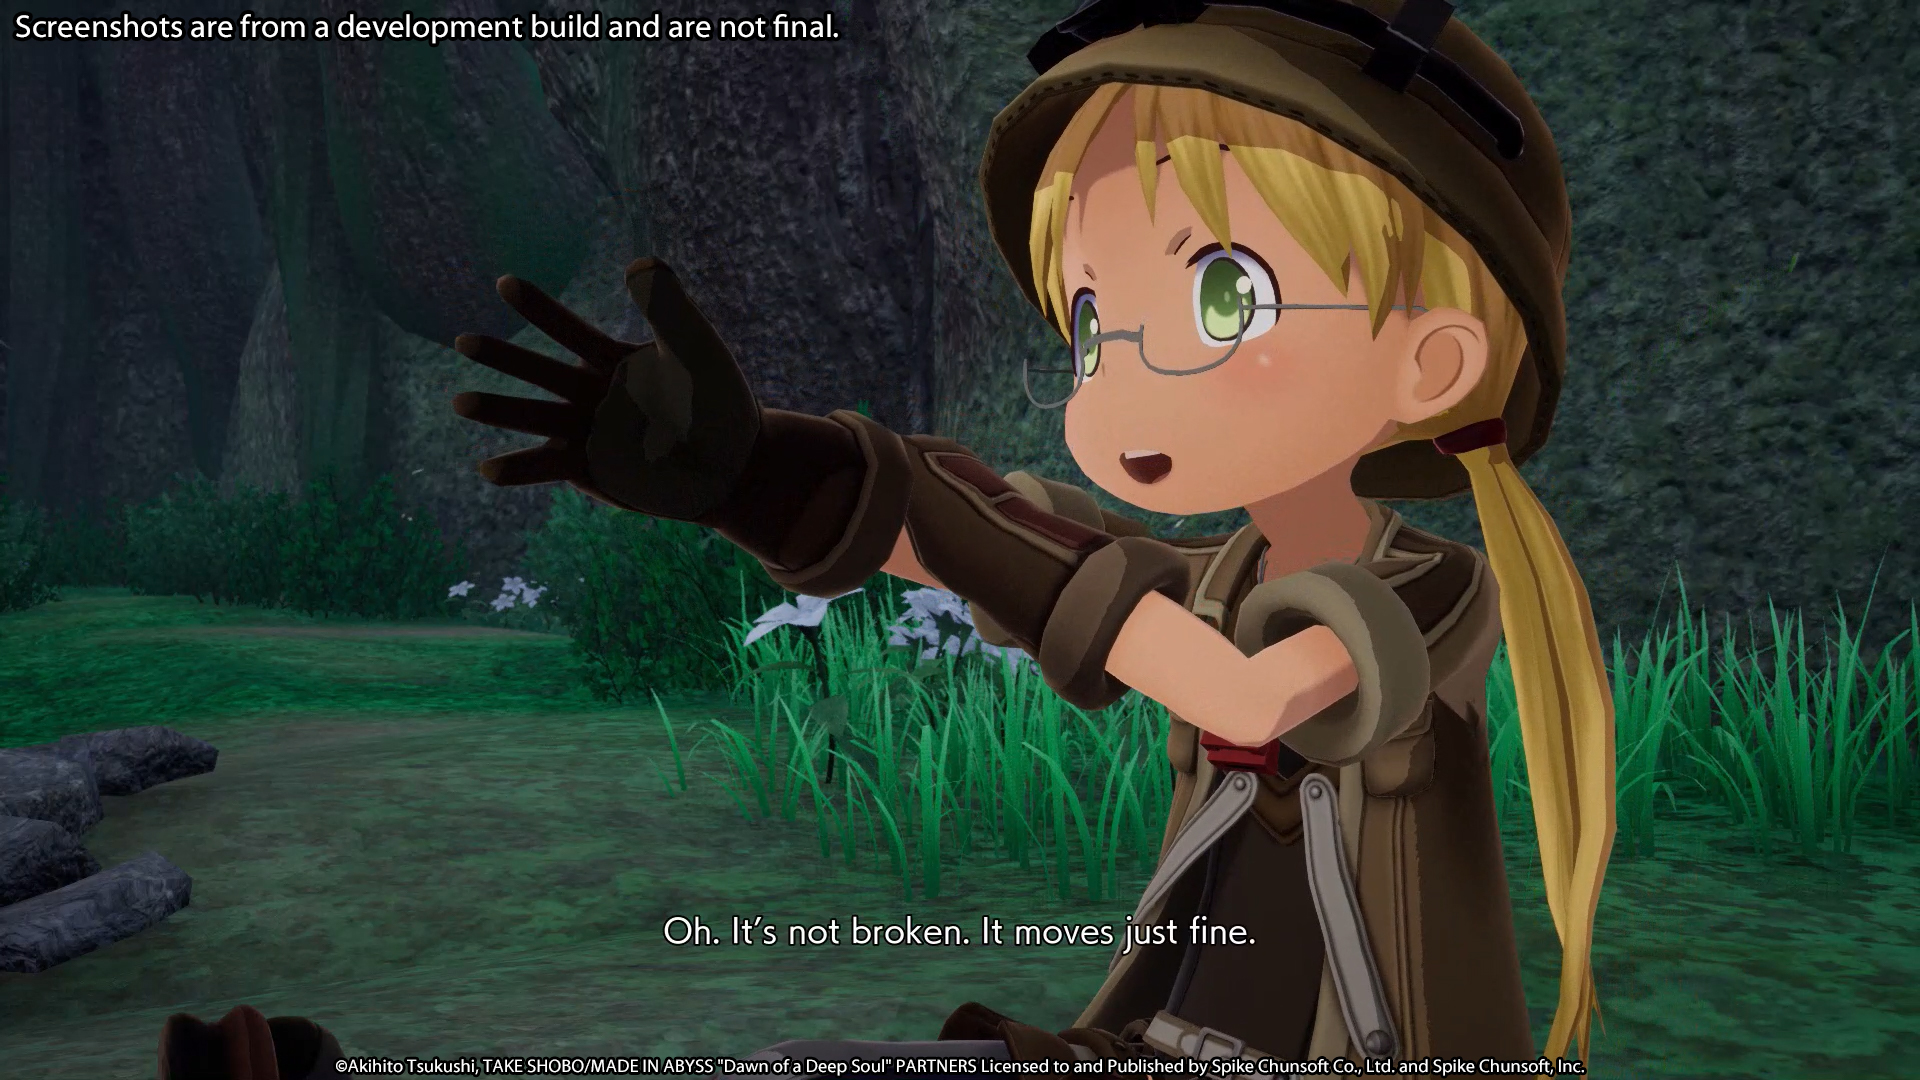 Made In Abyss: Binary Star Falling Into Darkness File Size Seemingly  Revealed